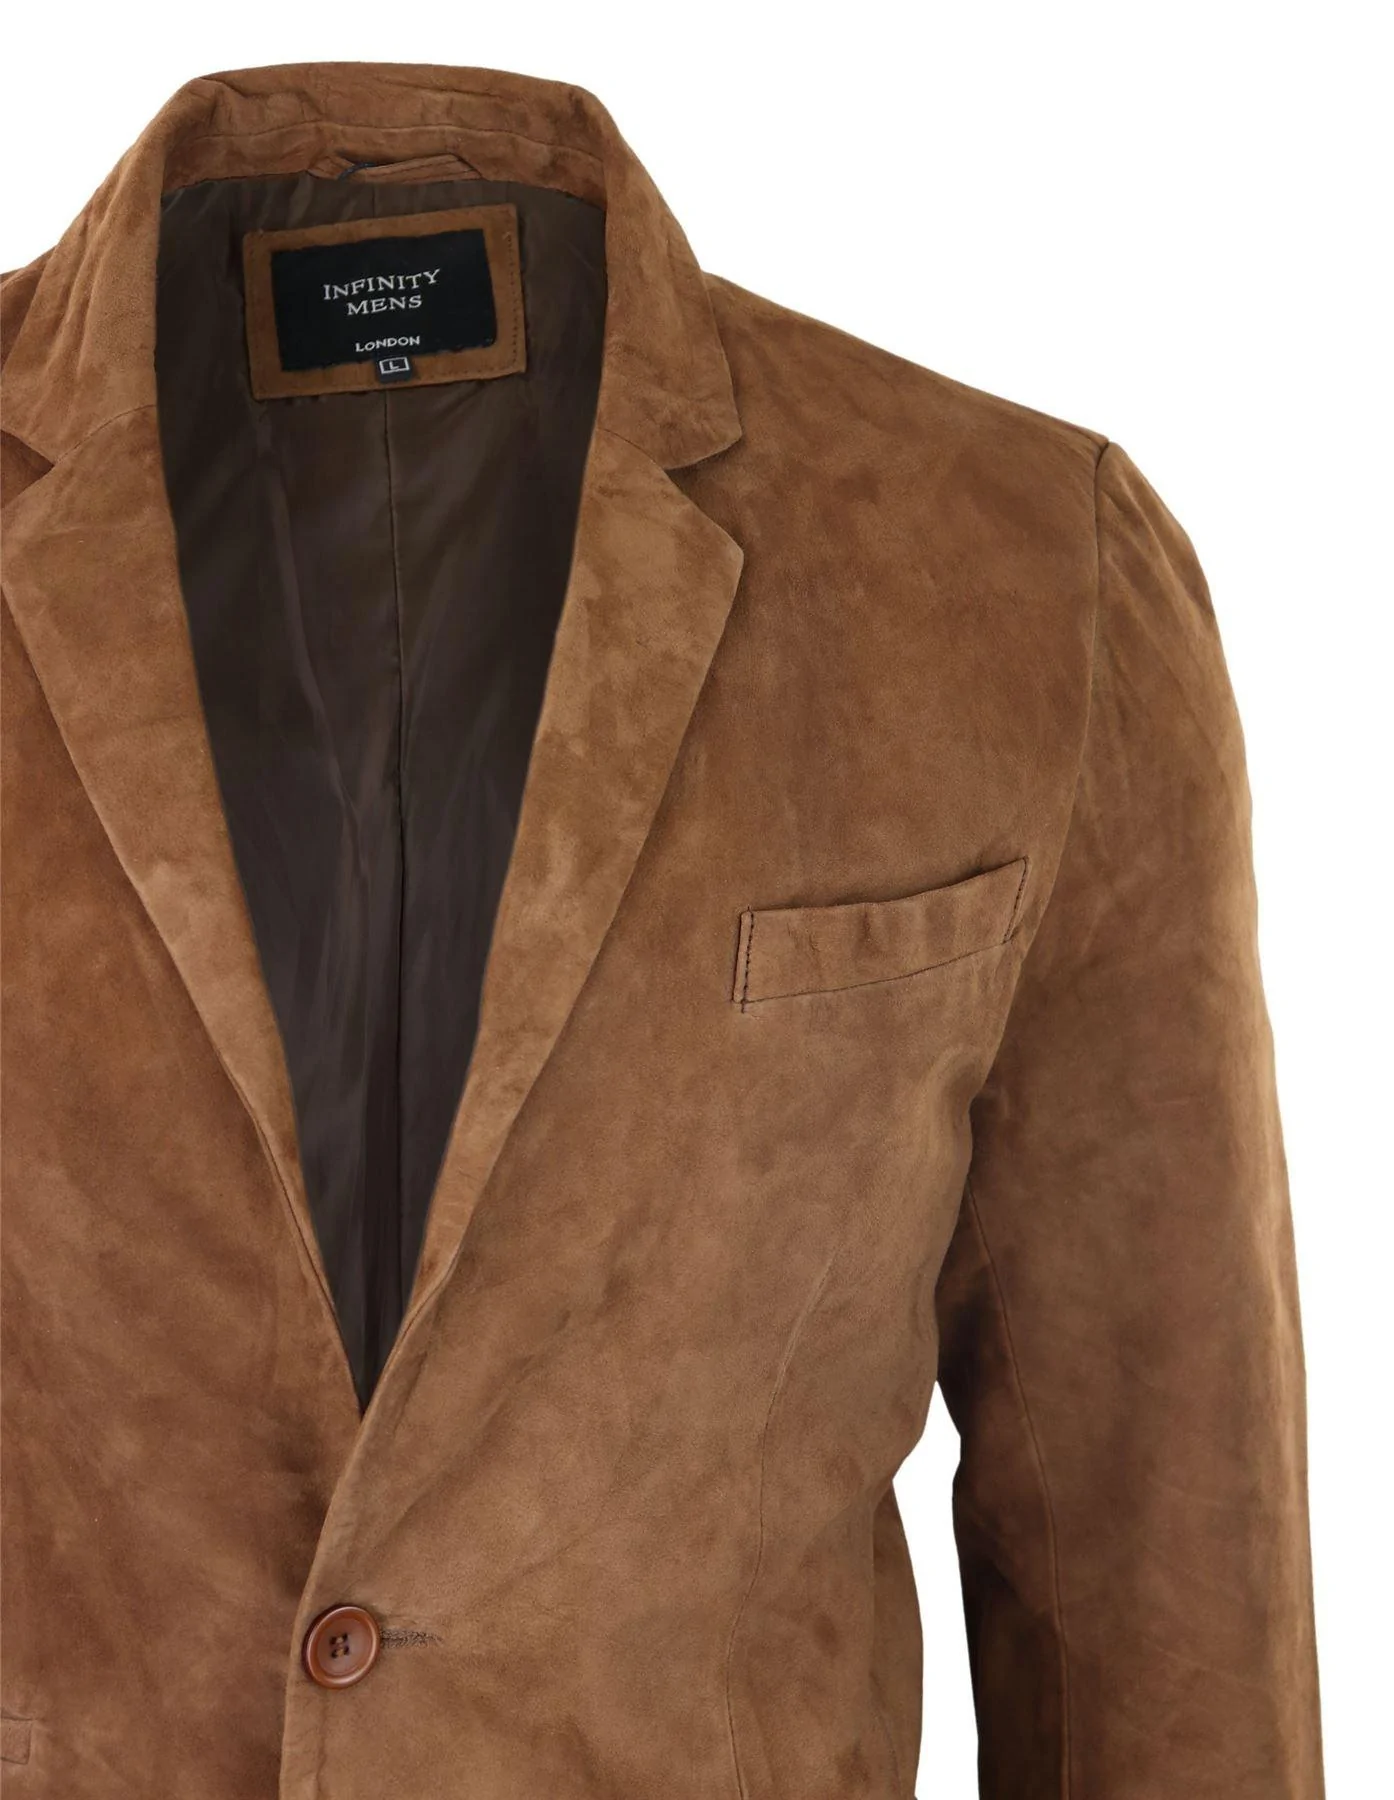 Mens Genuine Suede Blazer Style Jacket Leather Mens Classic